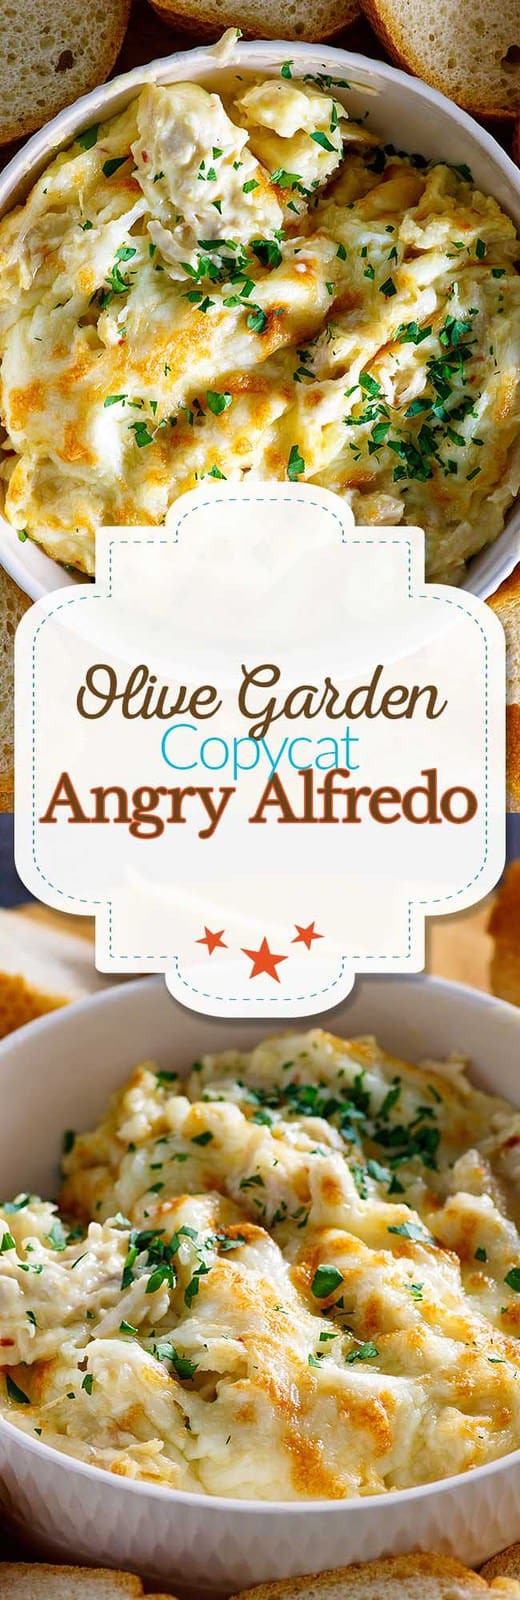 Olive Garden Thanksgiving
 Copycat Olive Garden Angry Alfredo Dipping Sauce